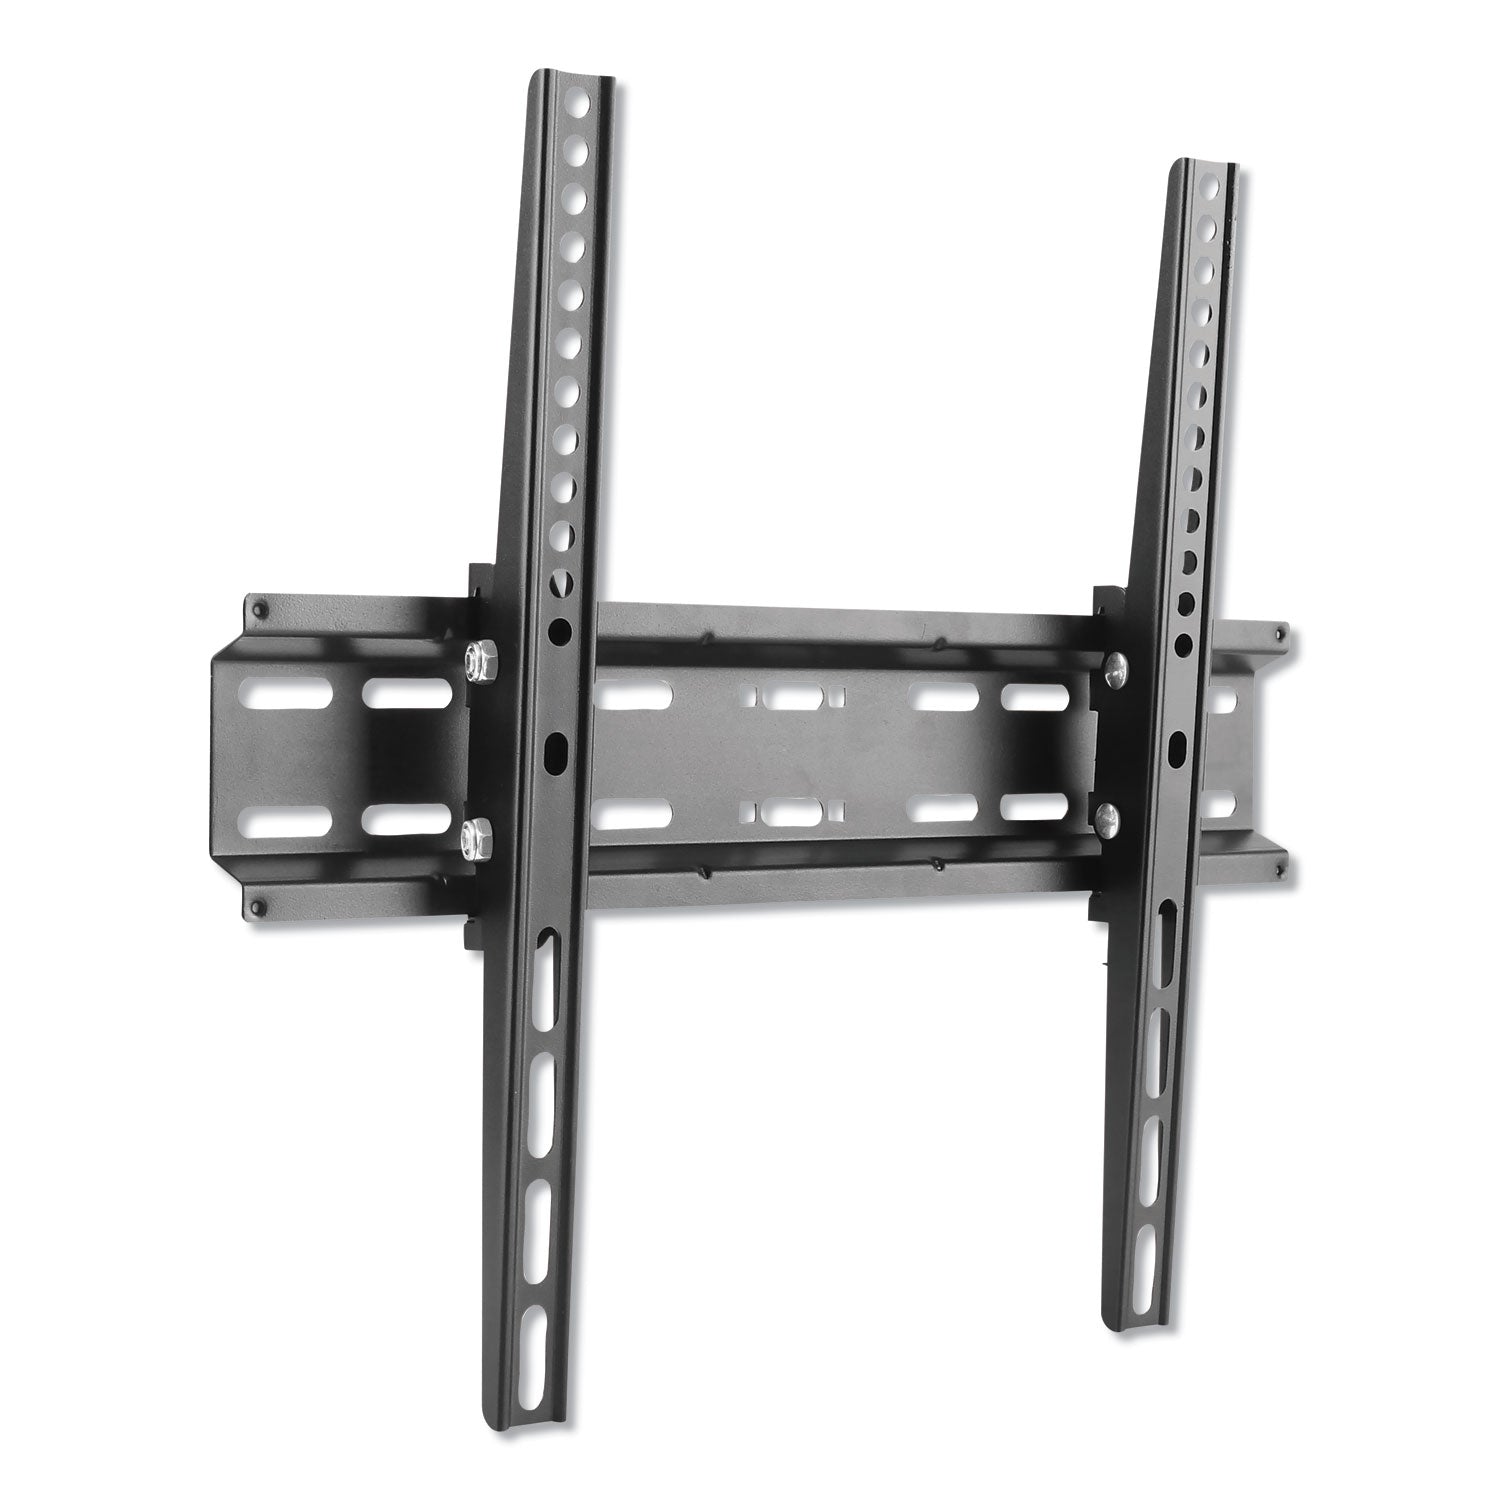 fixed-and-tilt-tv-wall-mount-for-monitors-32-to-55-167w-x-2d-x-183h_ivr56025 - 2